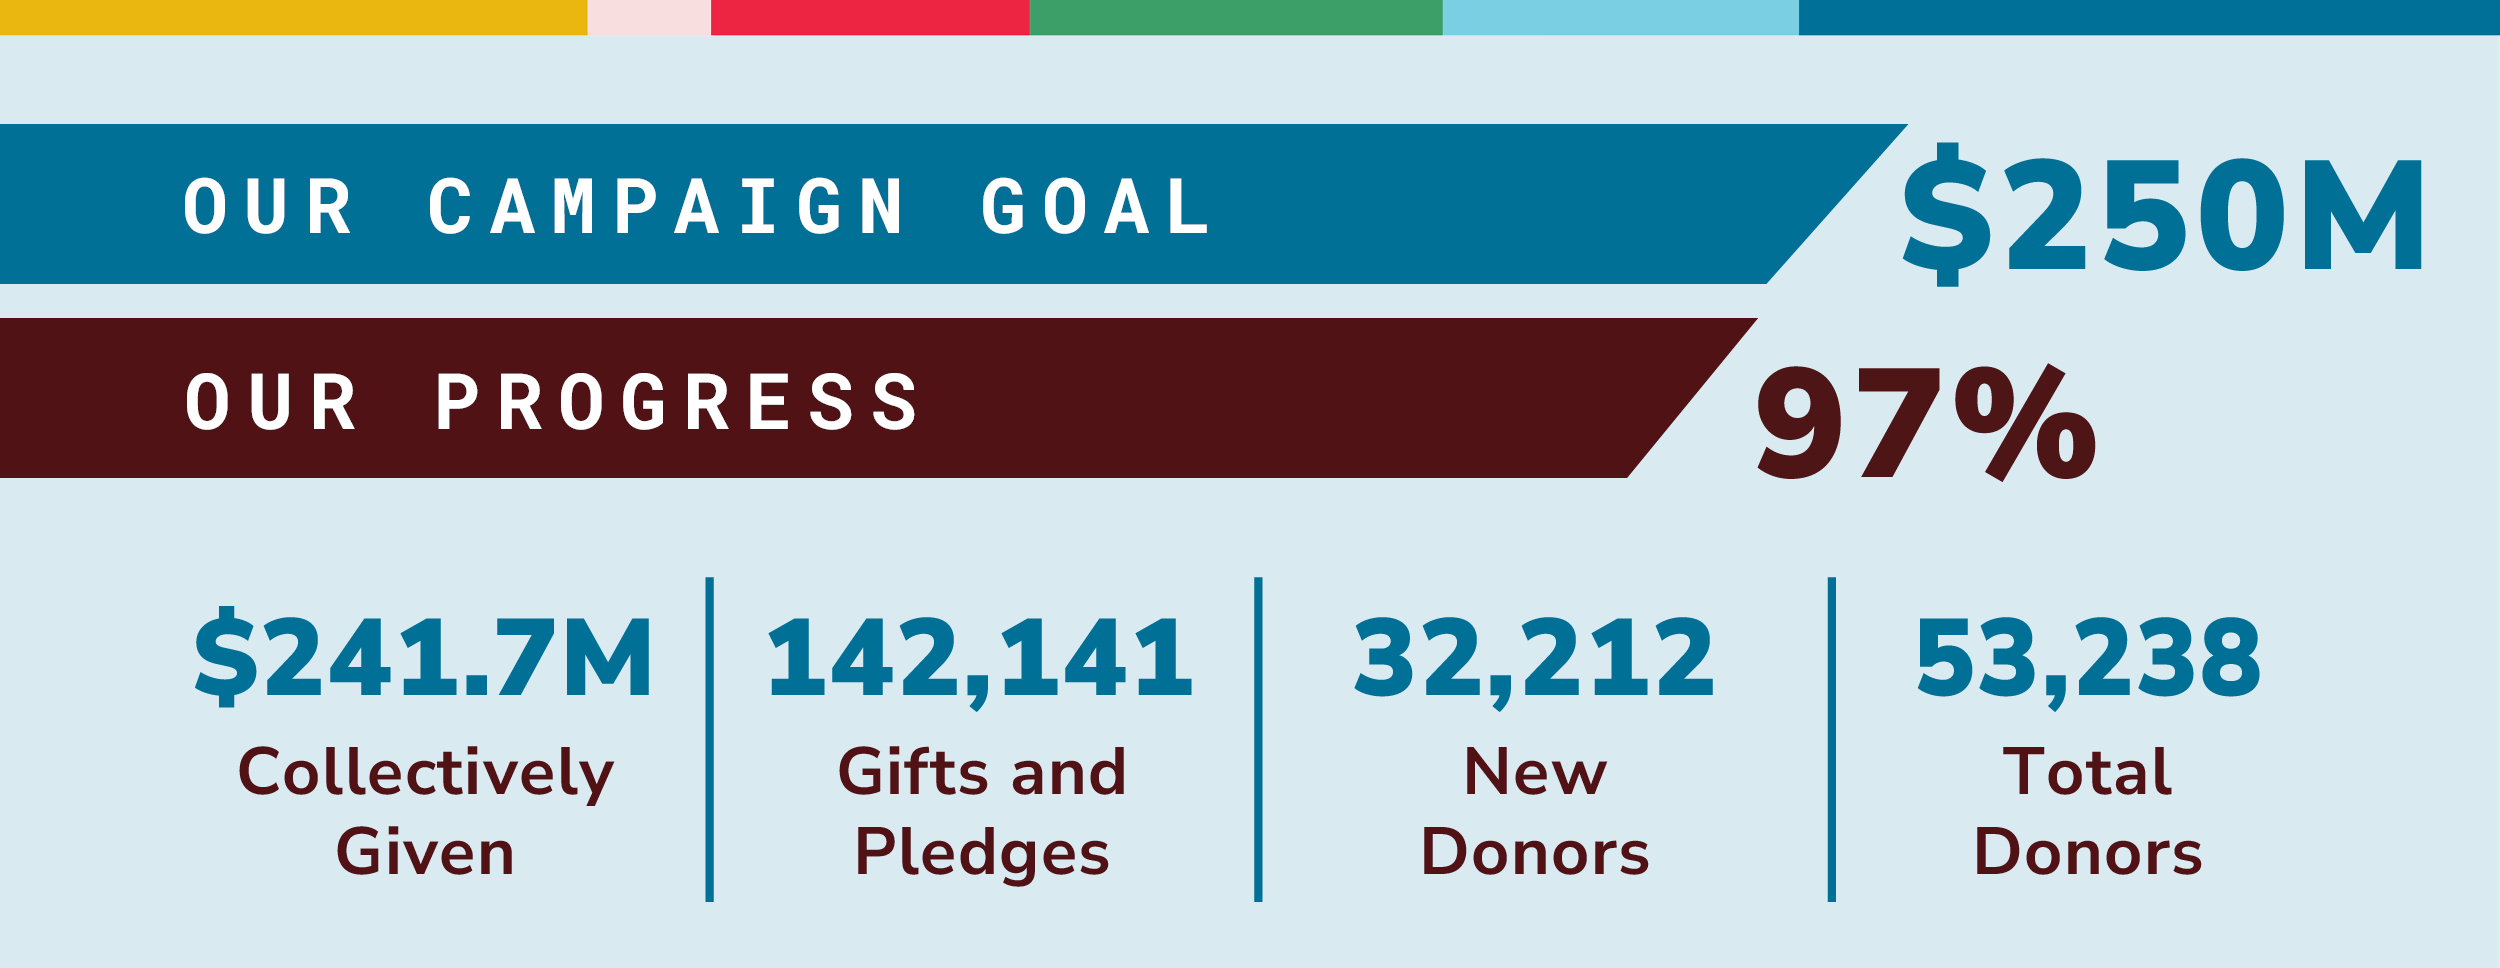 Graphic. Our Campaign Goal: $250million. Our Progress: 97%. $241.7 million collectively given. 142,141 gifts and pledges. 32,212 new donors. 53,238 total donors.